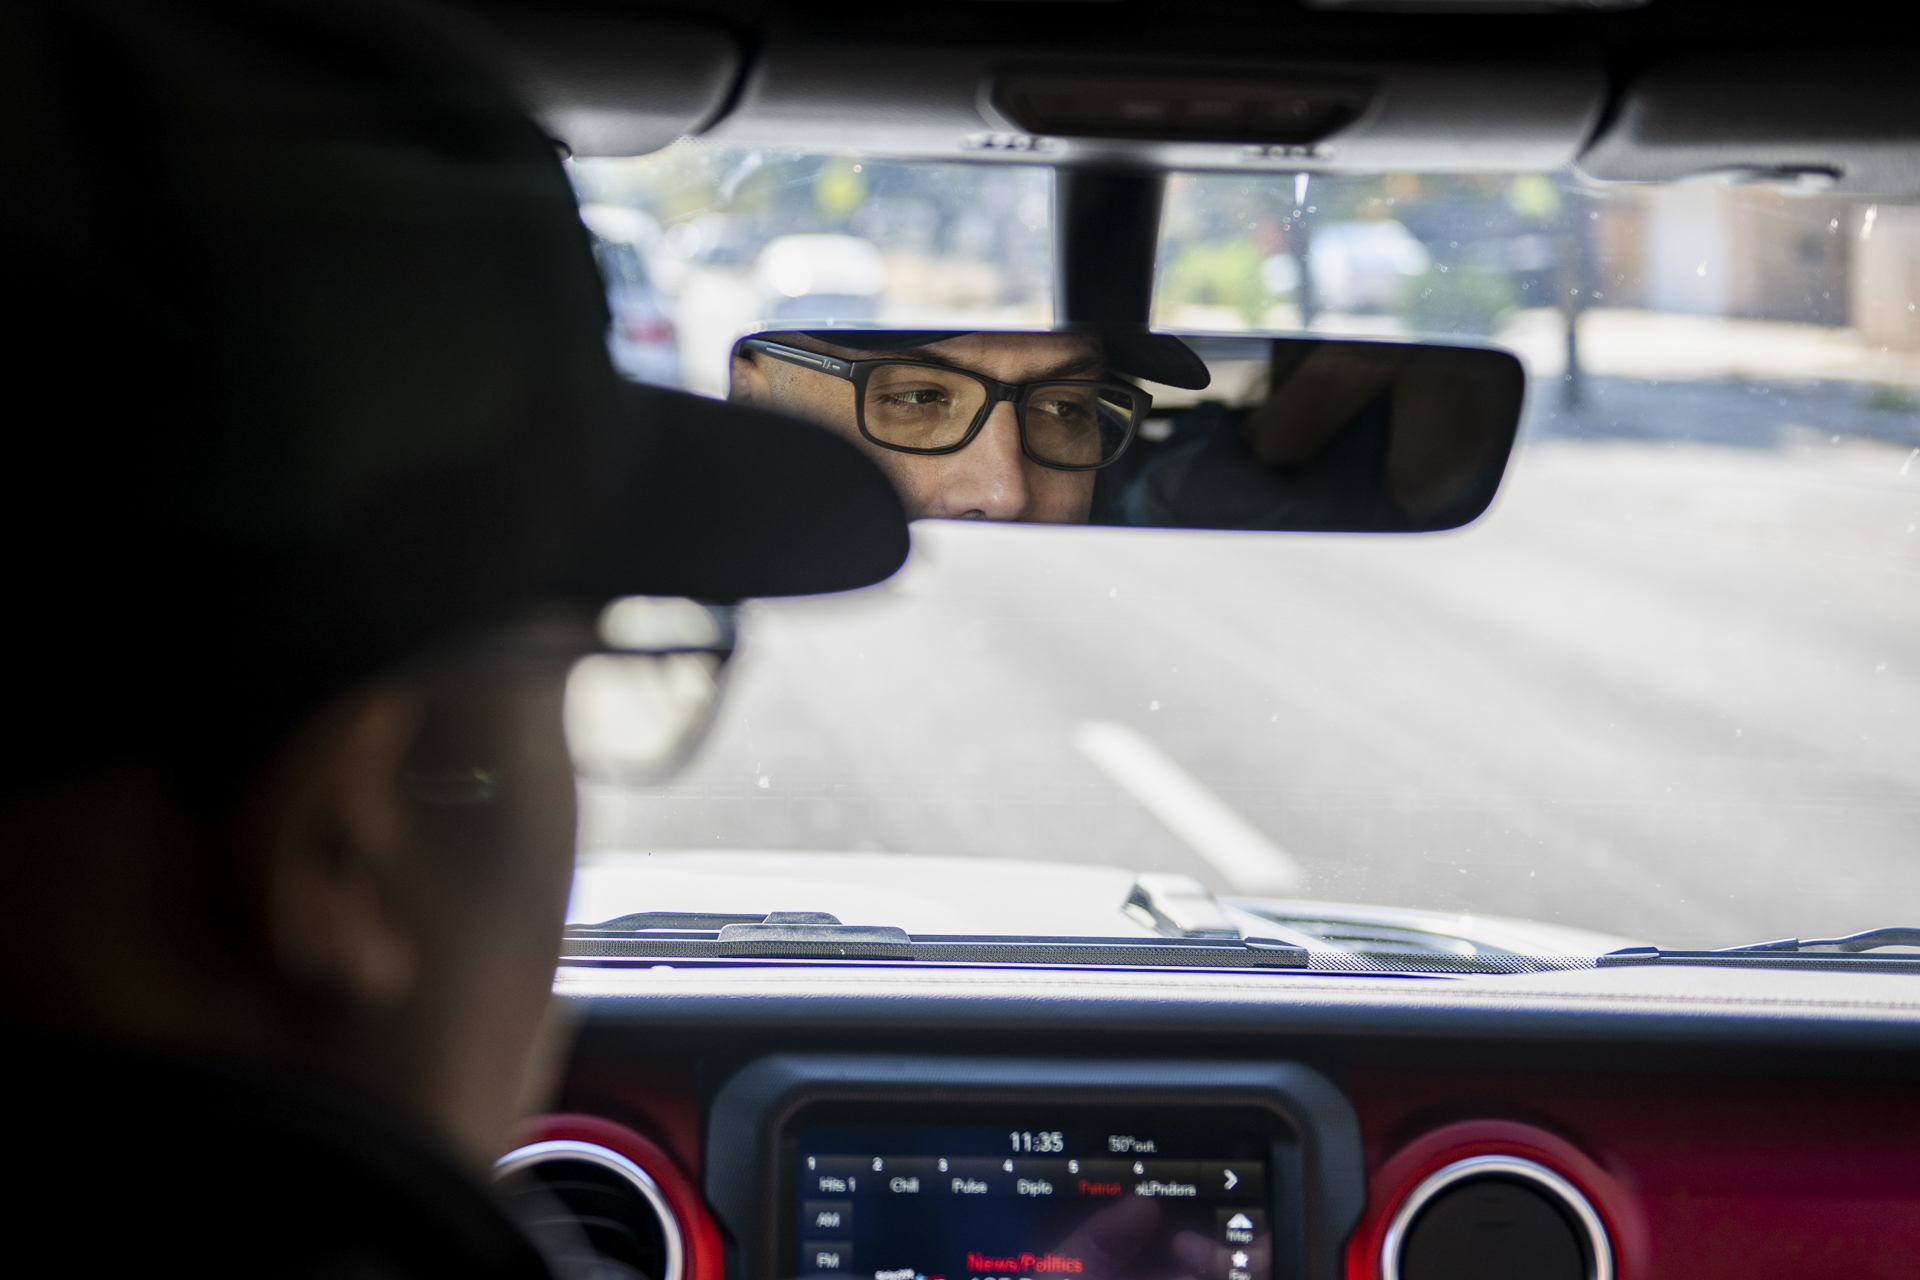 A photo taken from the backseat of a vehicle from behind the driver's side. Blurry in the foreground, and in focus in the rearview mirror, we see a light-skinned man in a black baseball cap driving and looking to the right.